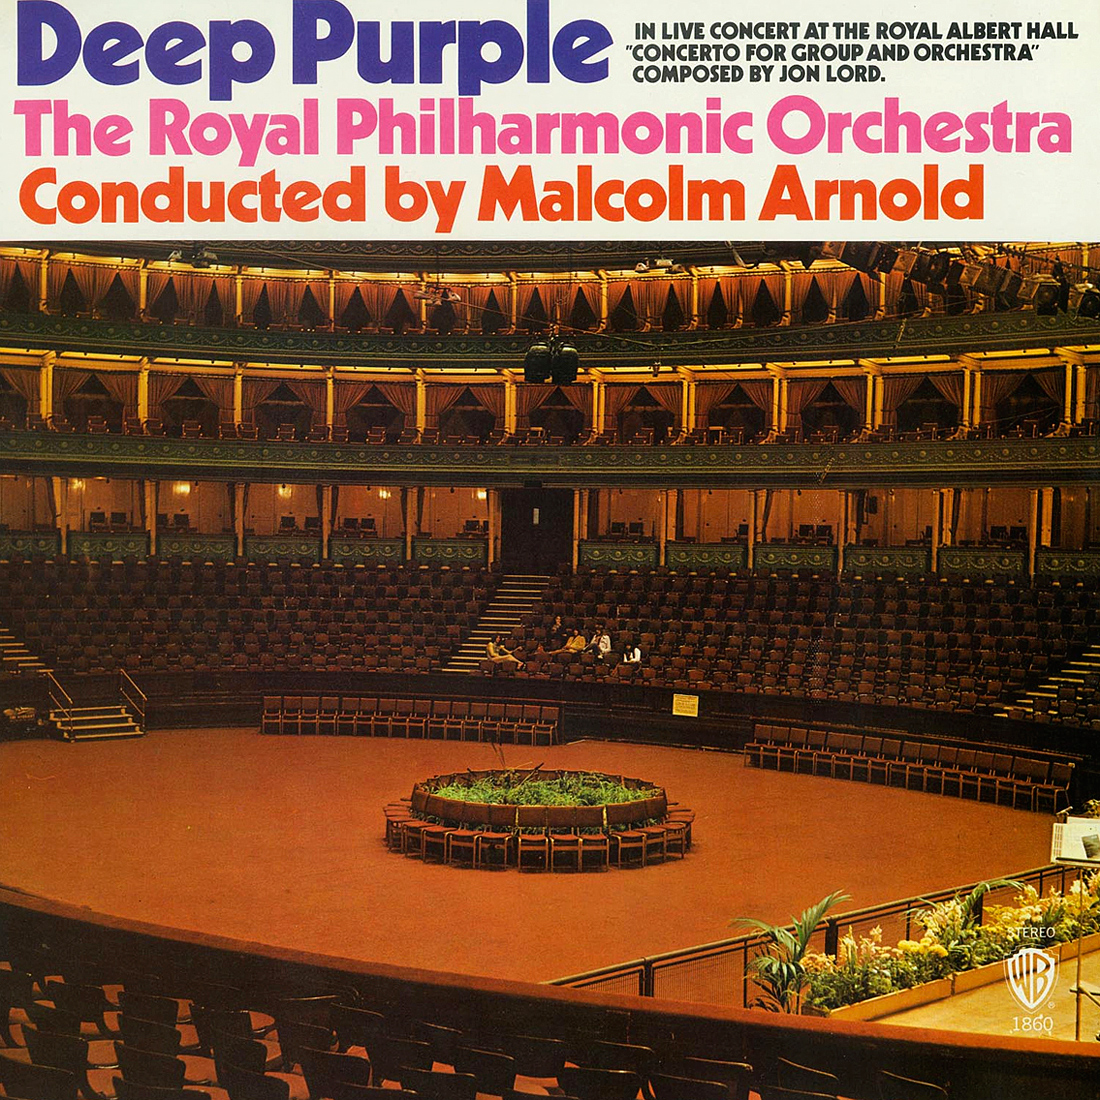 Deep Purple – Concerto For Group And Orchestra (1969/2012) [HDTracks FLAC 24bit/192kHz]